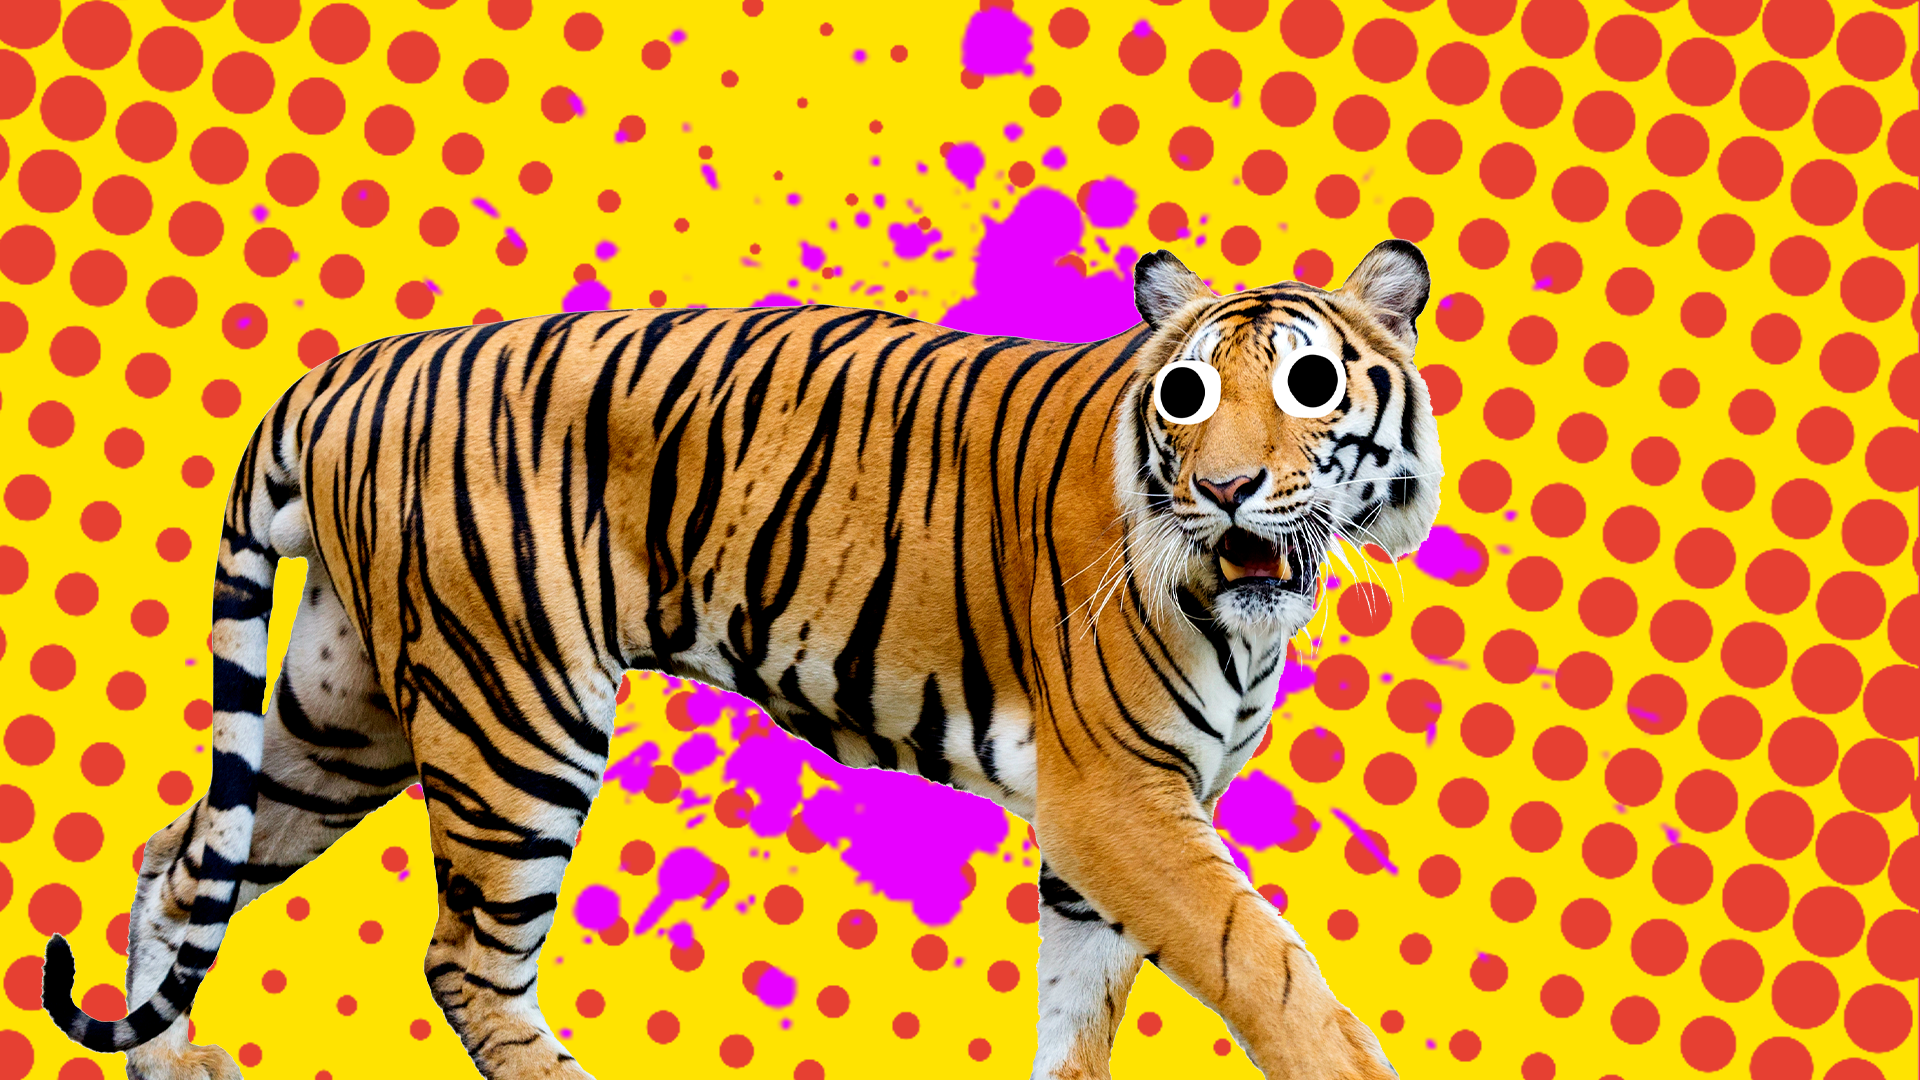 Tiger on red and yellow background